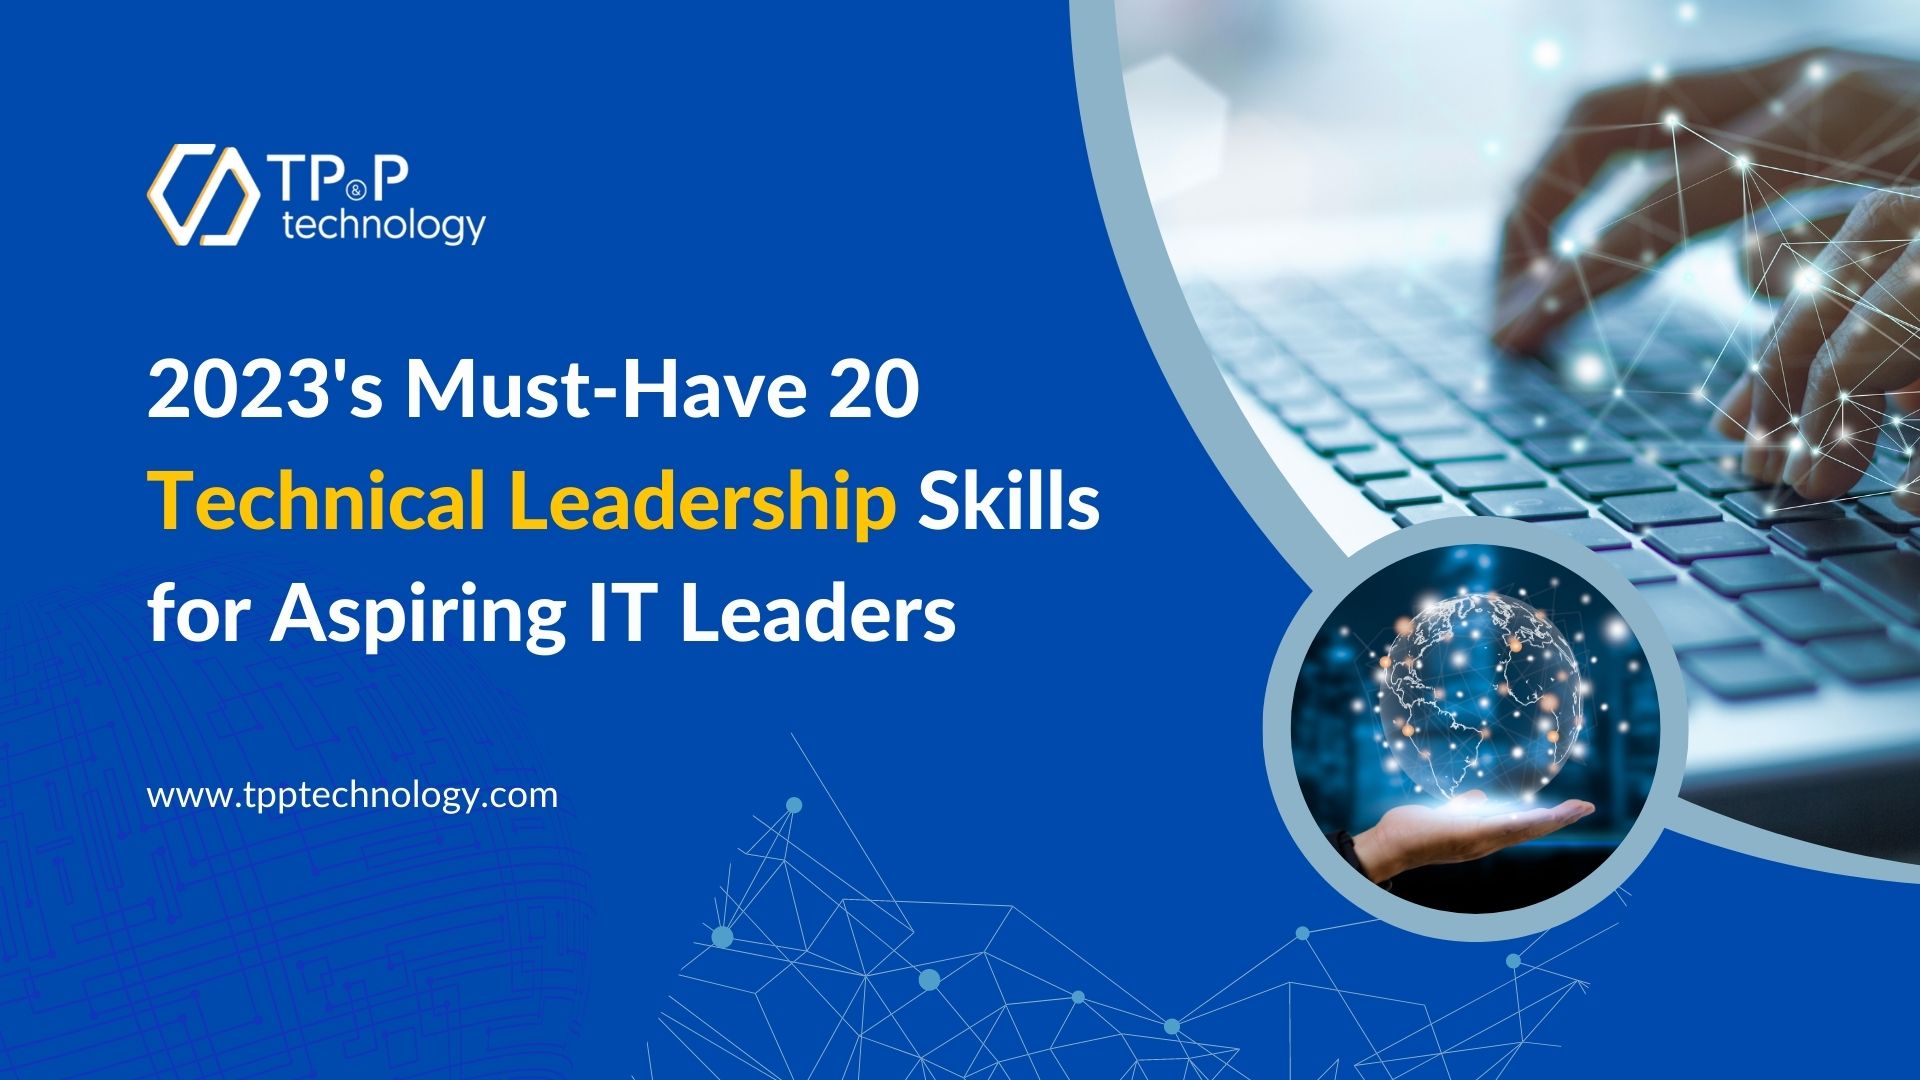 2023's Must-Have 20 Technical Leadership Skills for Aspiring IT Leaders